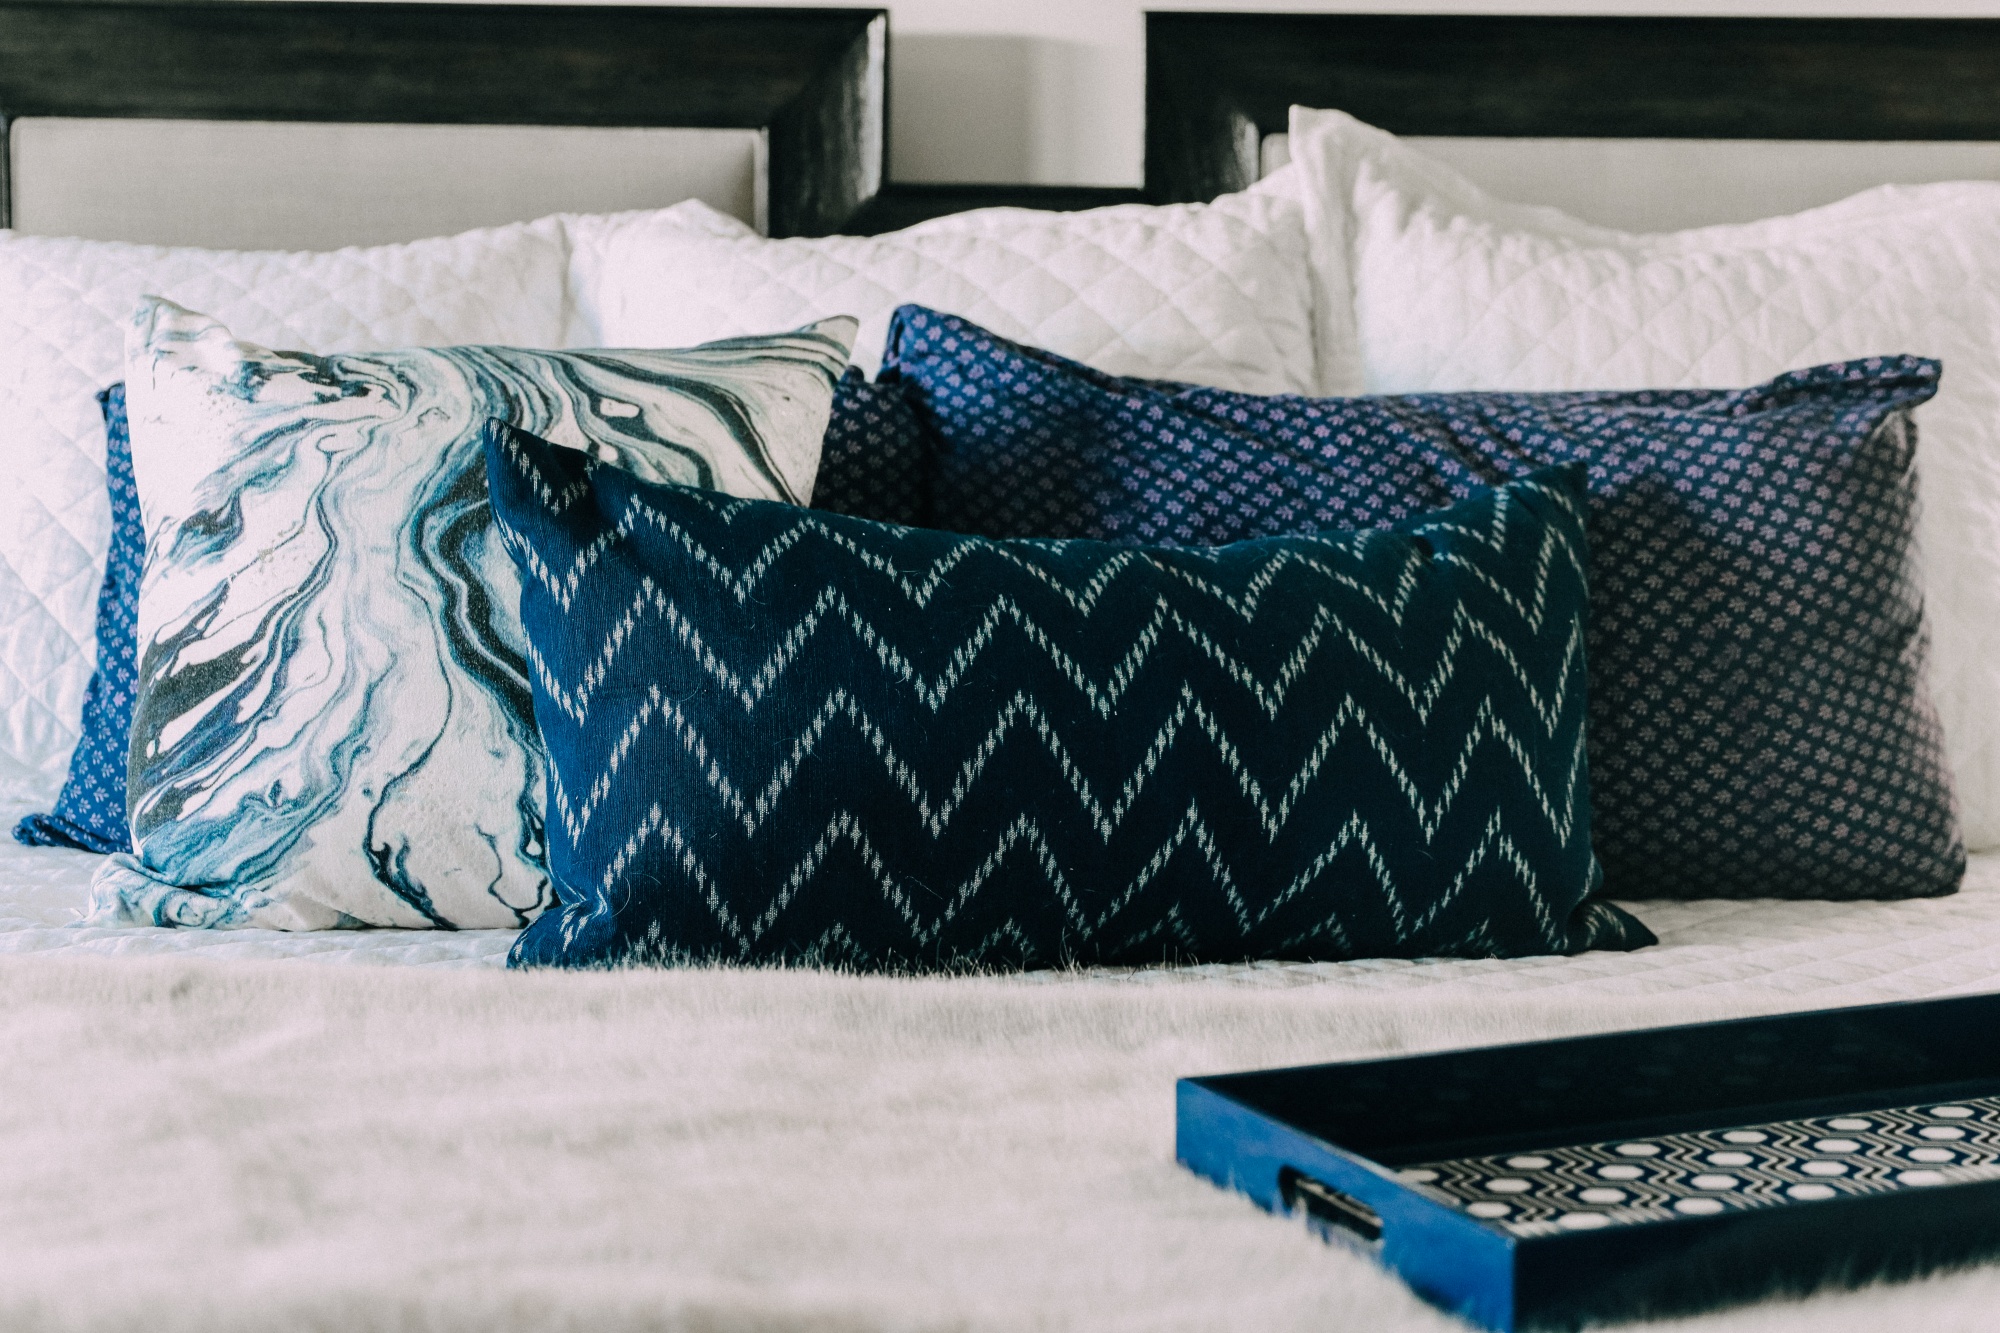 blue navy and white throw pillows arranged styled on top of king bed, how many throw pillows should you have on your bed